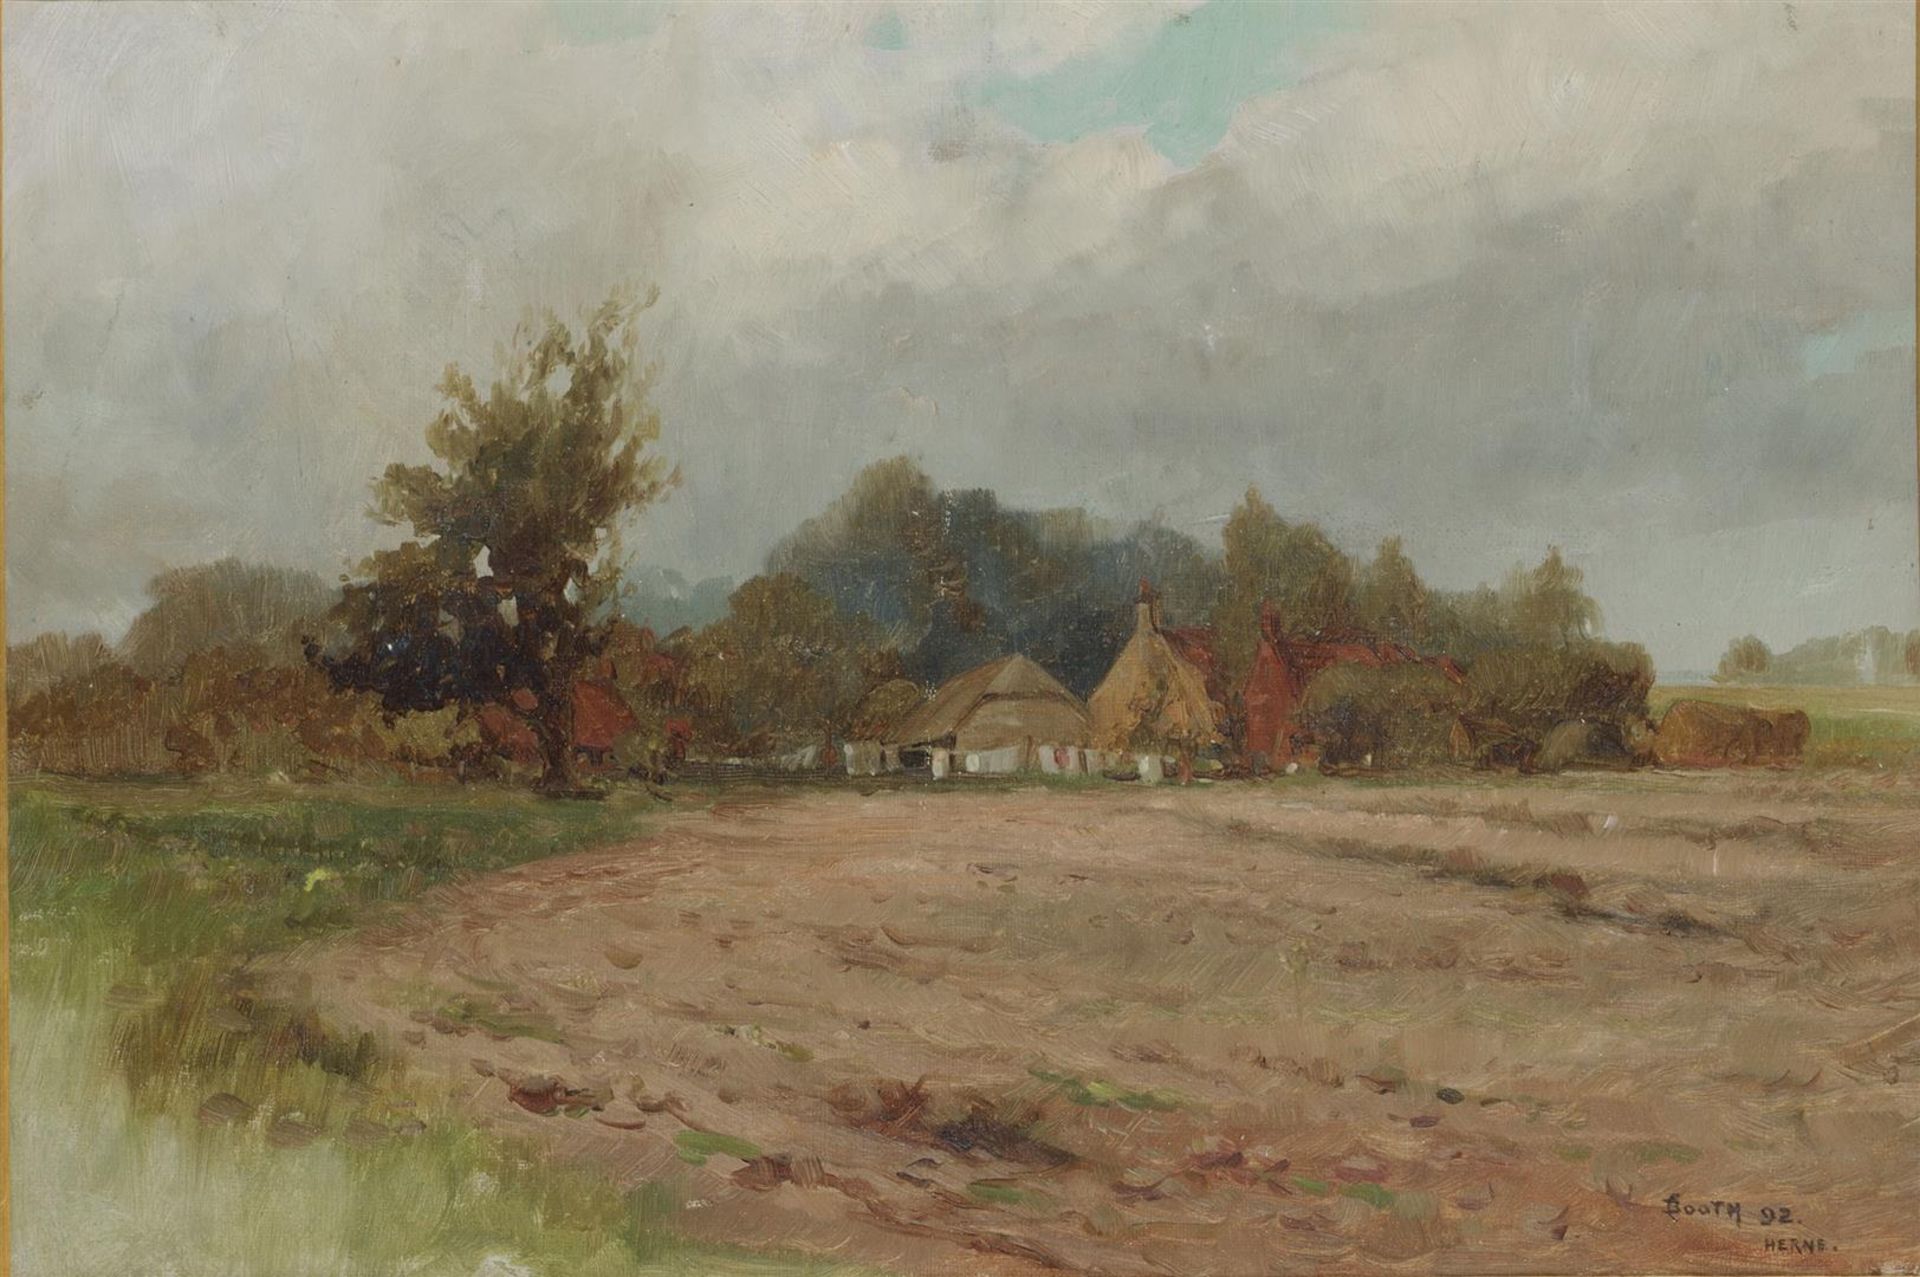 English School, 19th century. Cottages in a landscape. Sign